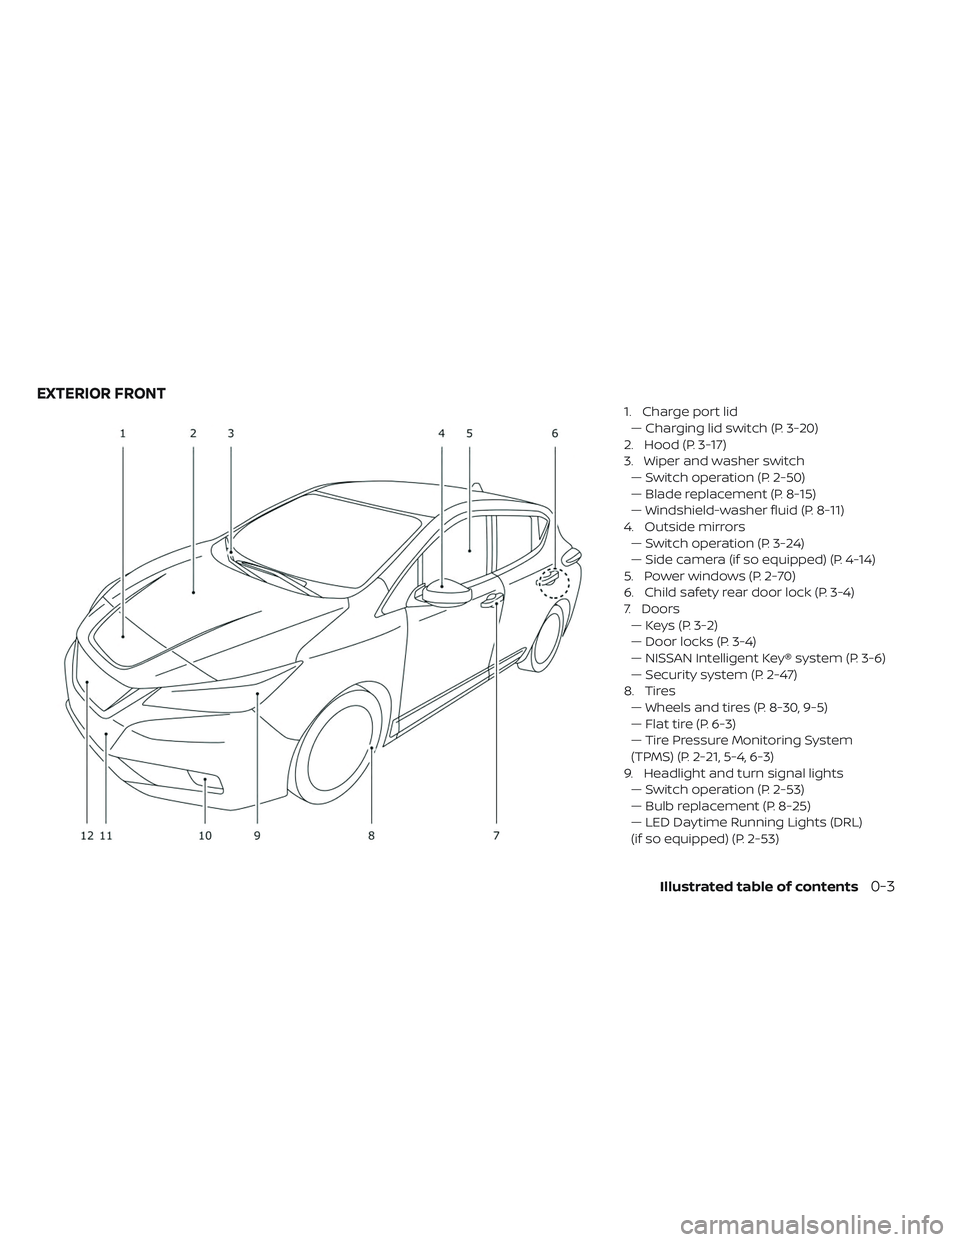 NISSAN LEAF 2019  Owner´s Manual 1. Charge port lid— Charging lid switch (P. 3-20)
2. Hood (P. 3-17)
3. Wiper and washer switch — Switch operation (P. 2-50)
— Blade replacement (P. 8-15)
— Windshield-washer fluid (P. 8-11)
4.